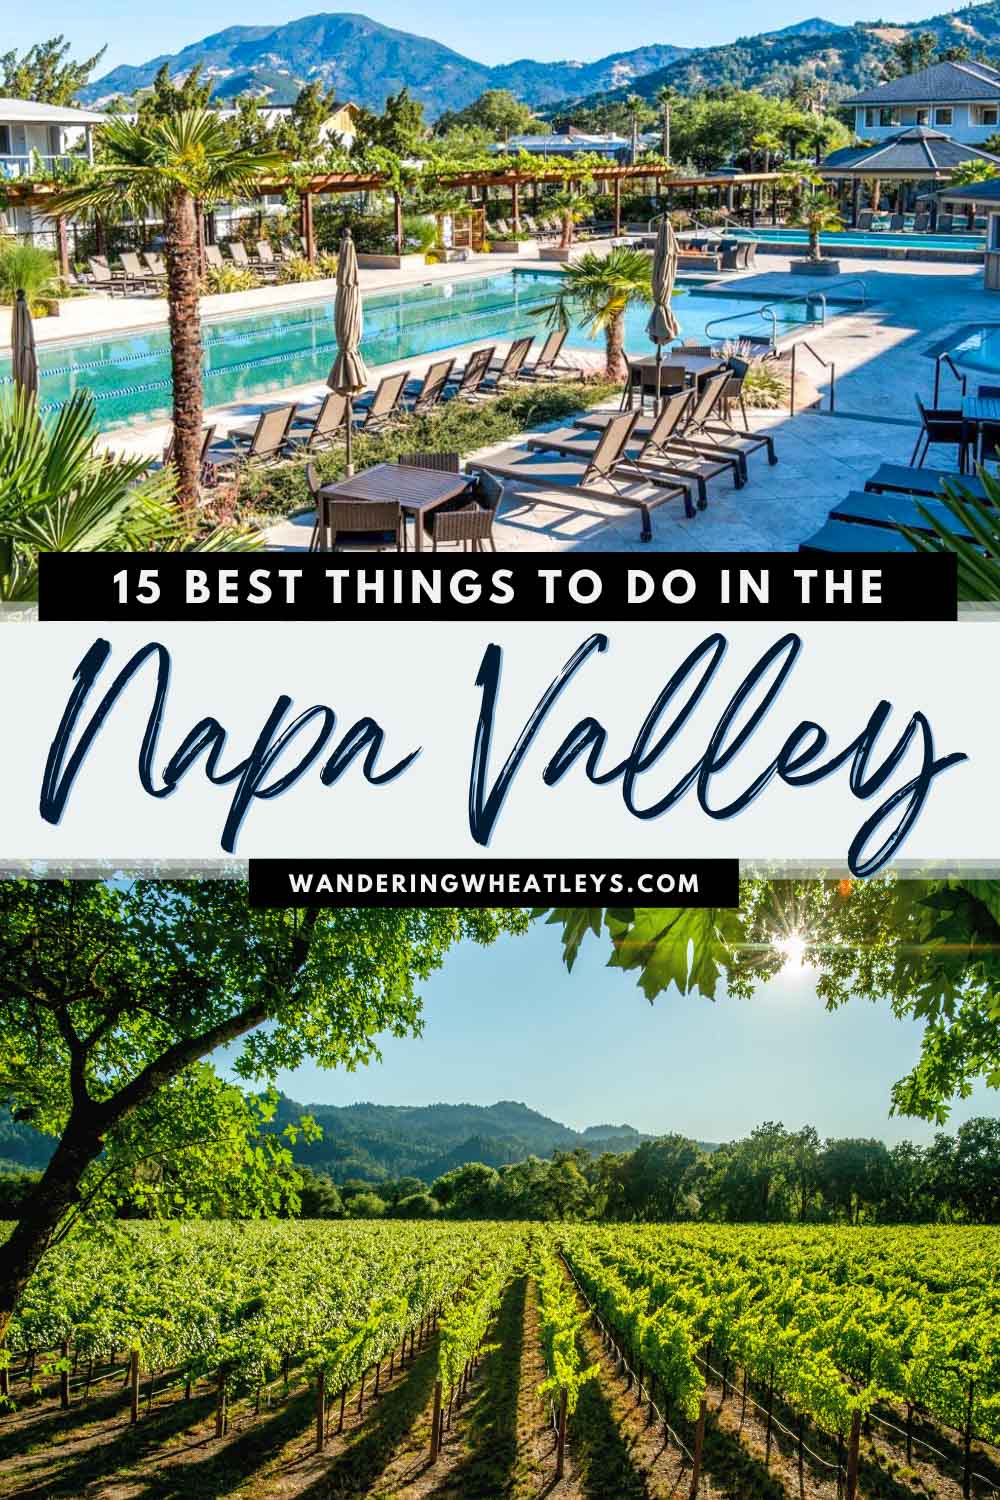 The Best Things to do in Napa Valley